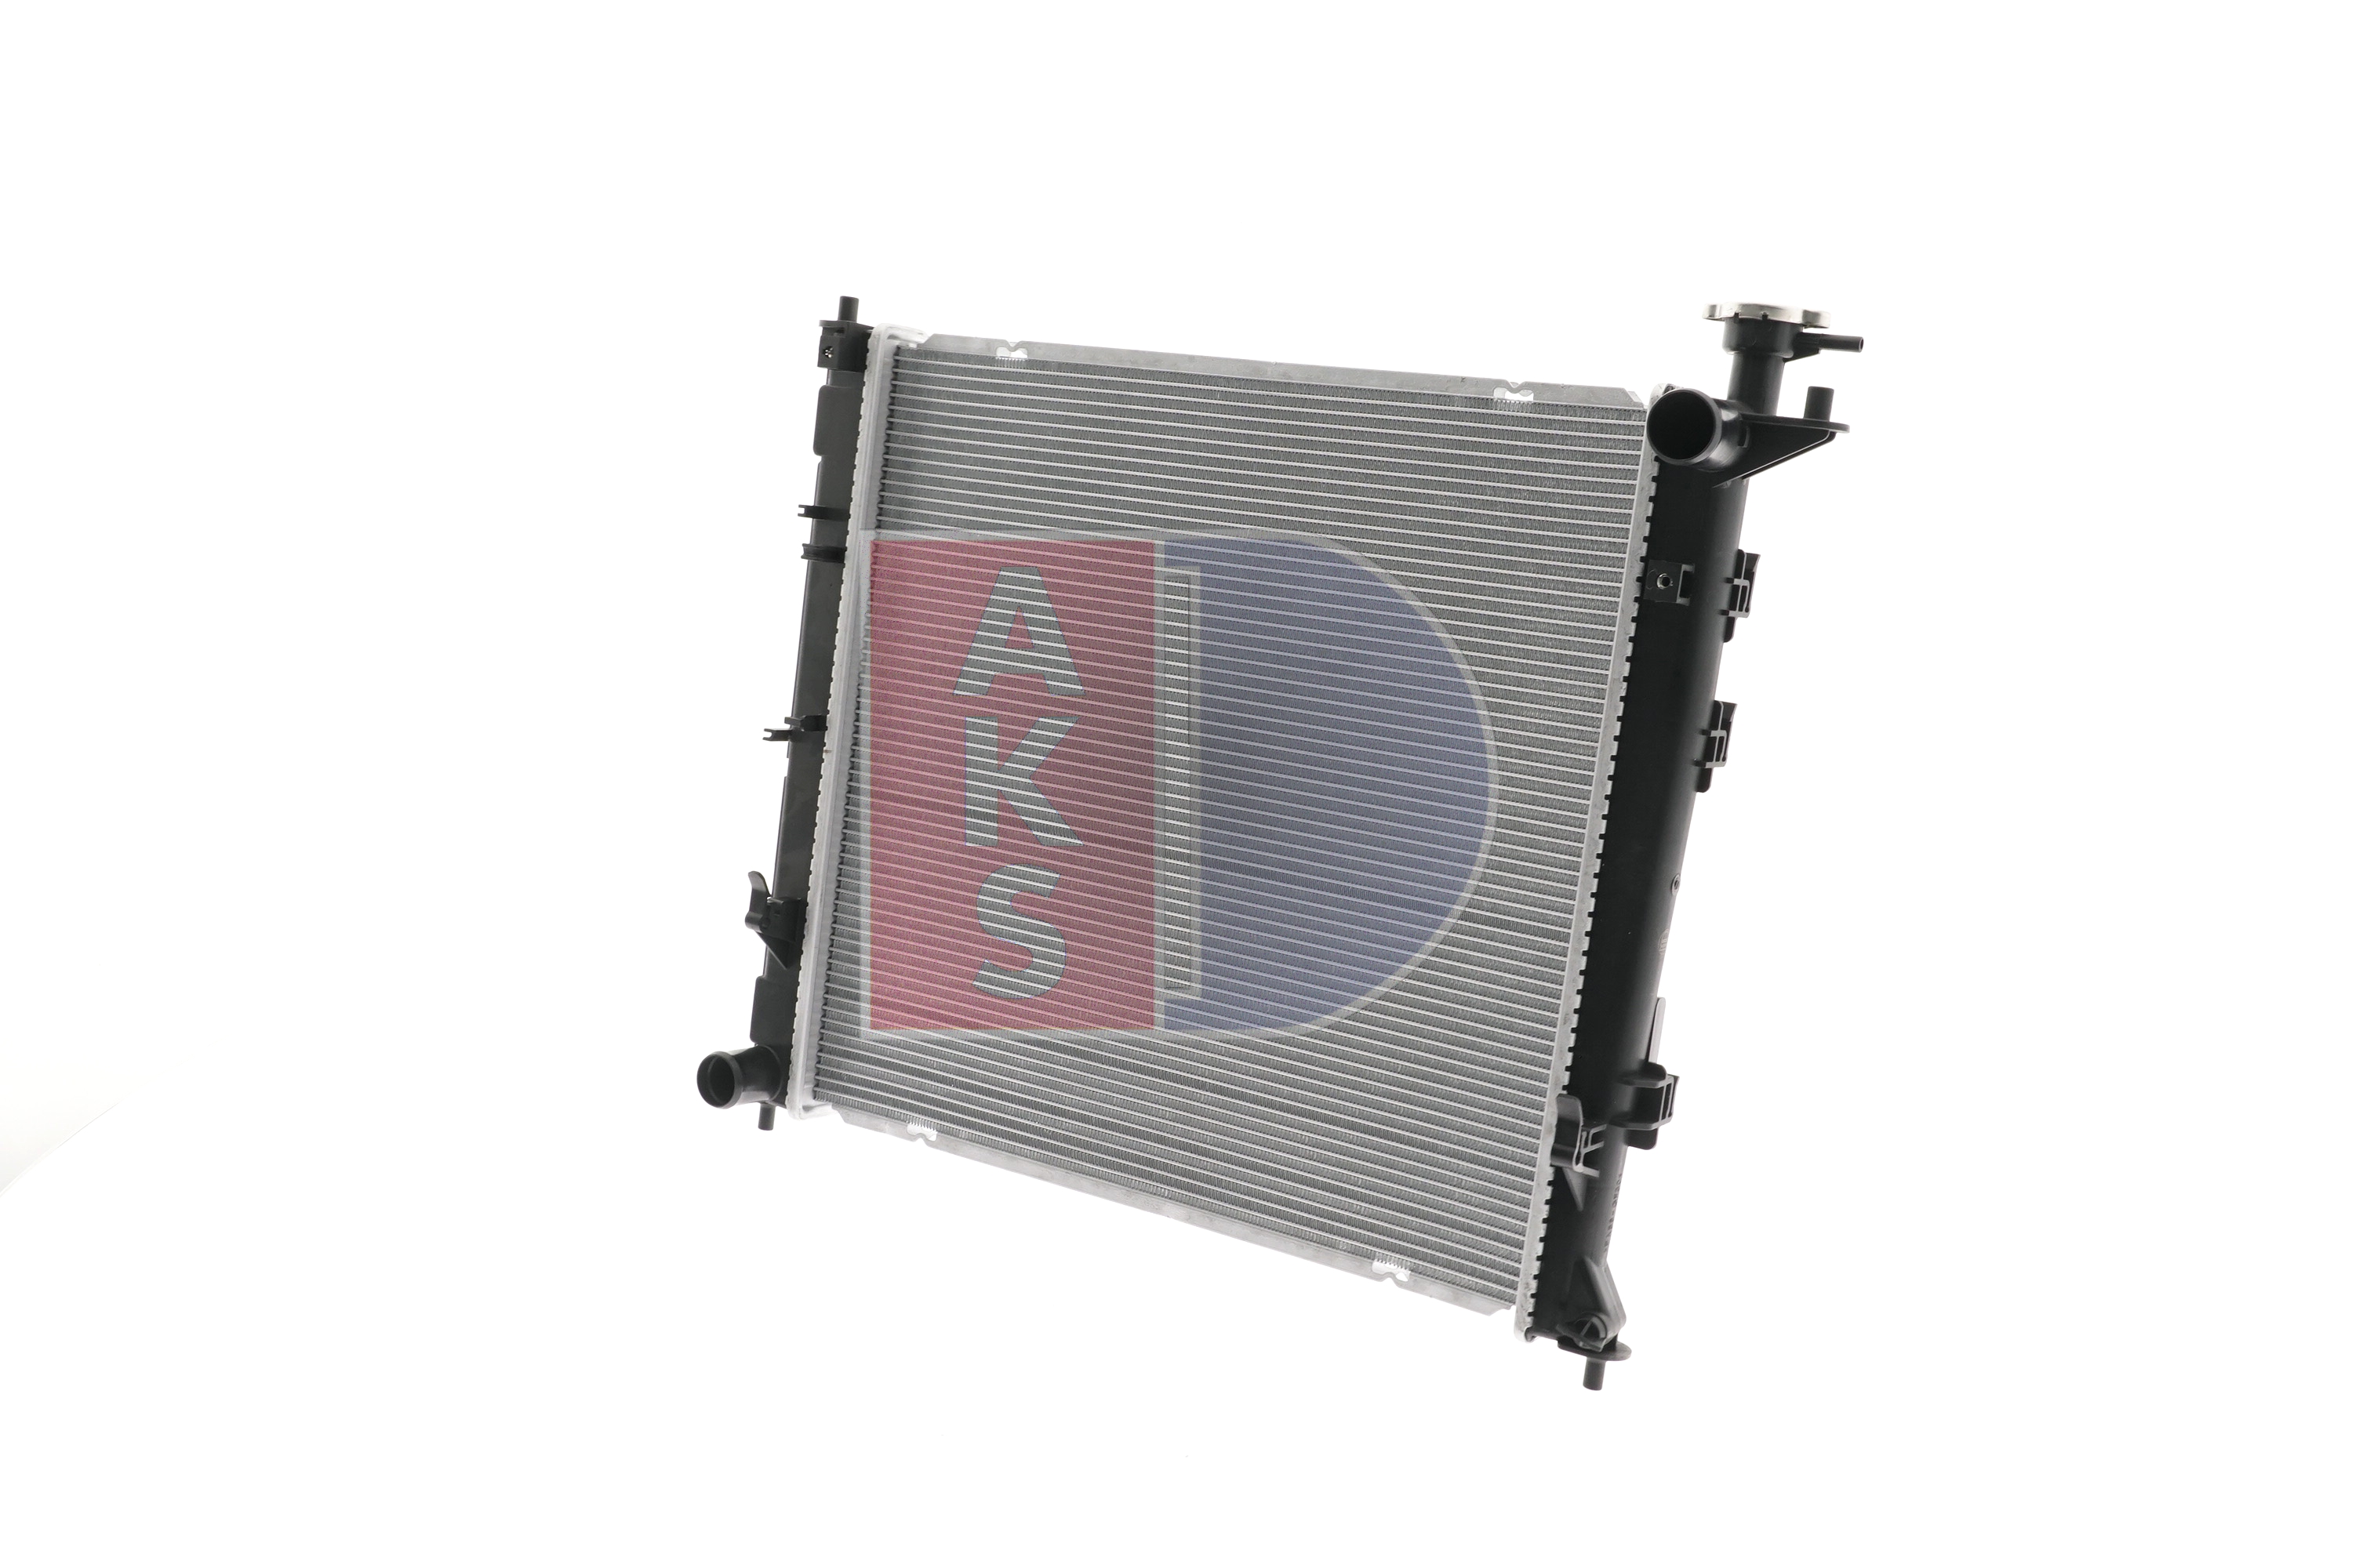 AKS DASIS 560129N Engine radiator Aluminium, for vehicles with/without air conditioning, 485 x 480 x 18 mm, Manual Transmission, Brazed cooling fins